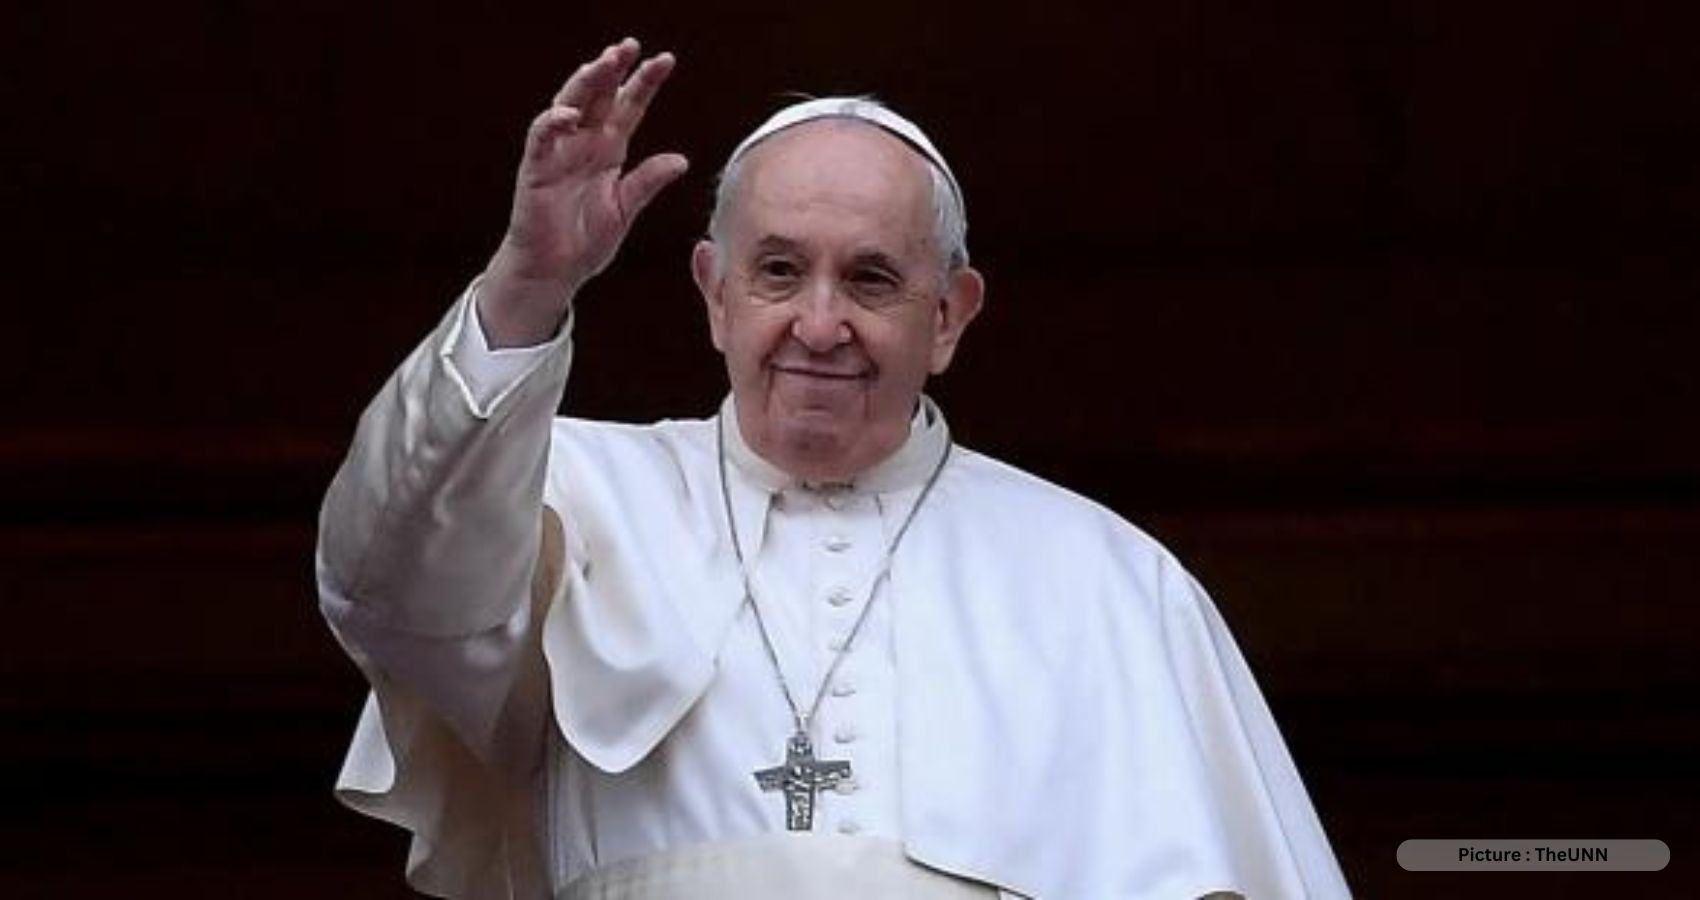 Pope Francis’ Message For Peace Now Orbits The Earth, To Be Heard Across All Borders